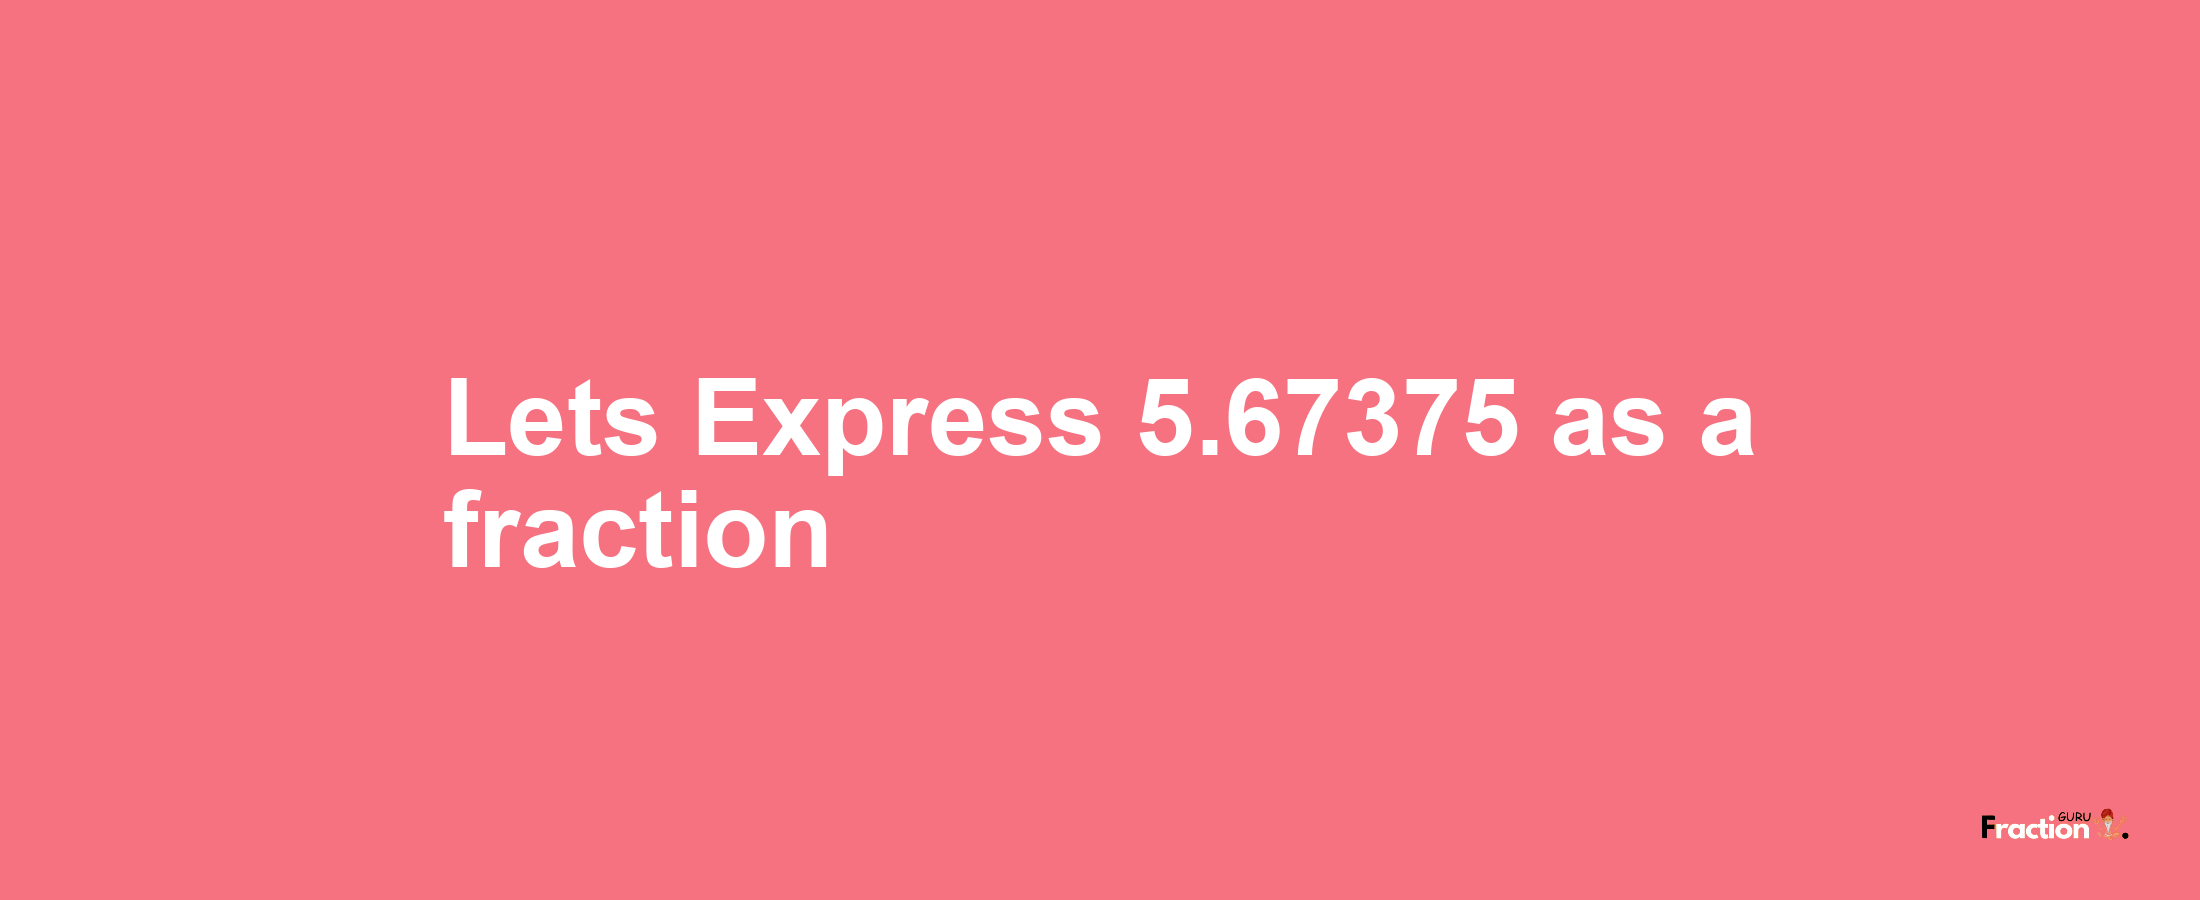 Lets Express 5.67375 as afraction